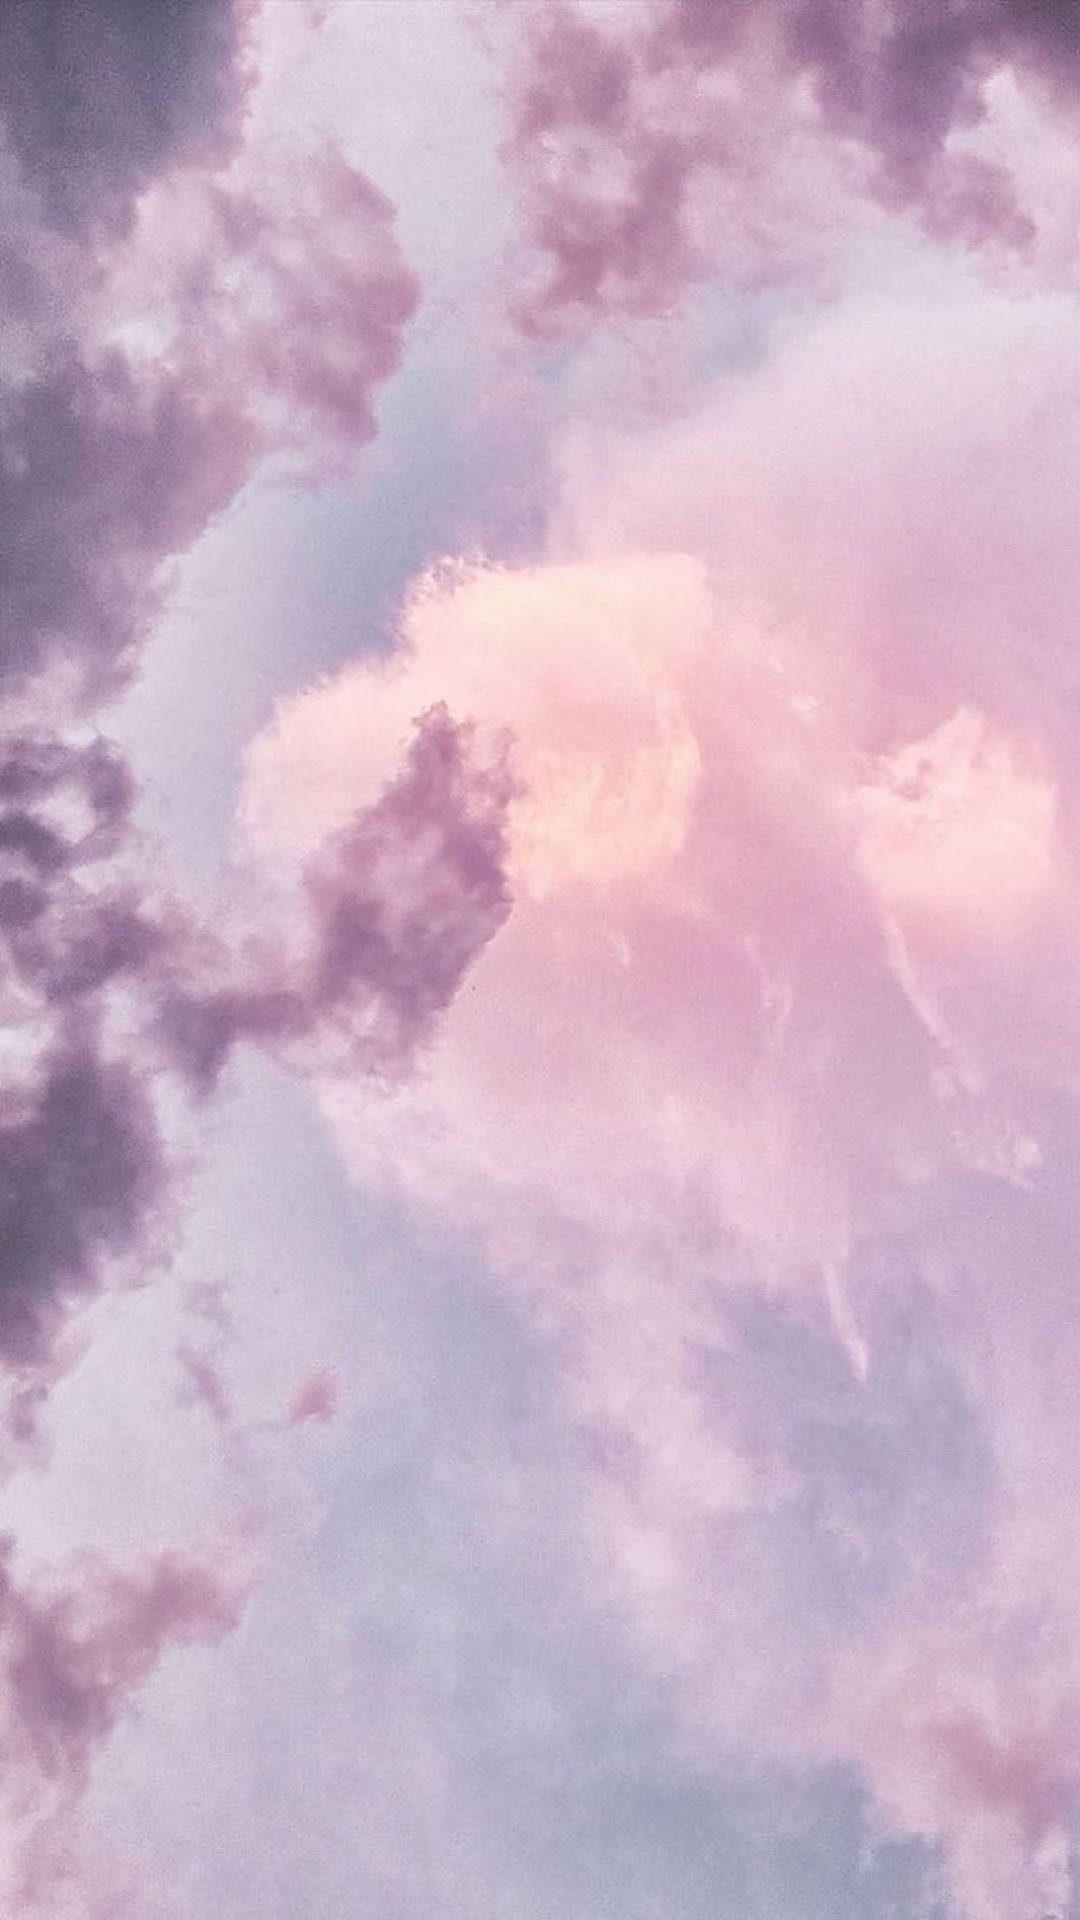 Upgrade your smartphone with this unique pastel pink iPhone Wallpaper